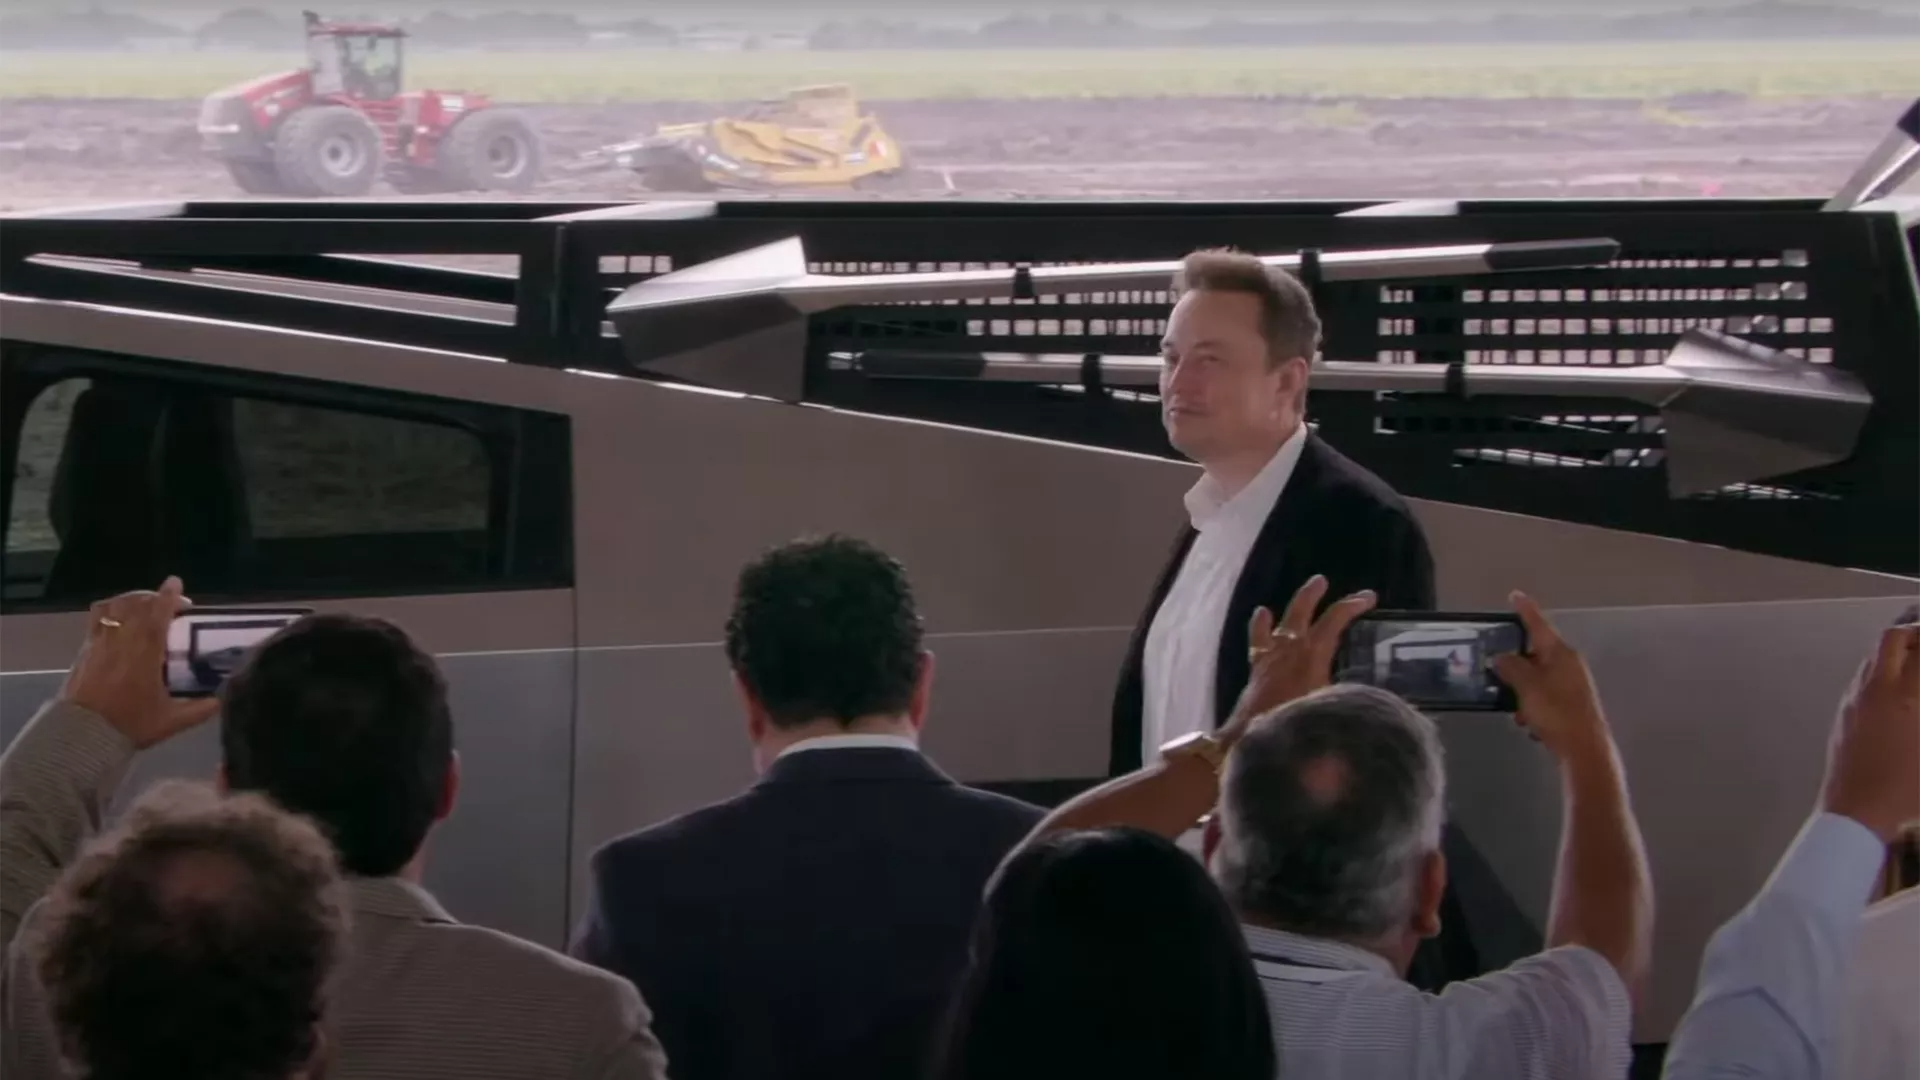 Elon Musk showed another Cybertruck, with shovels on board